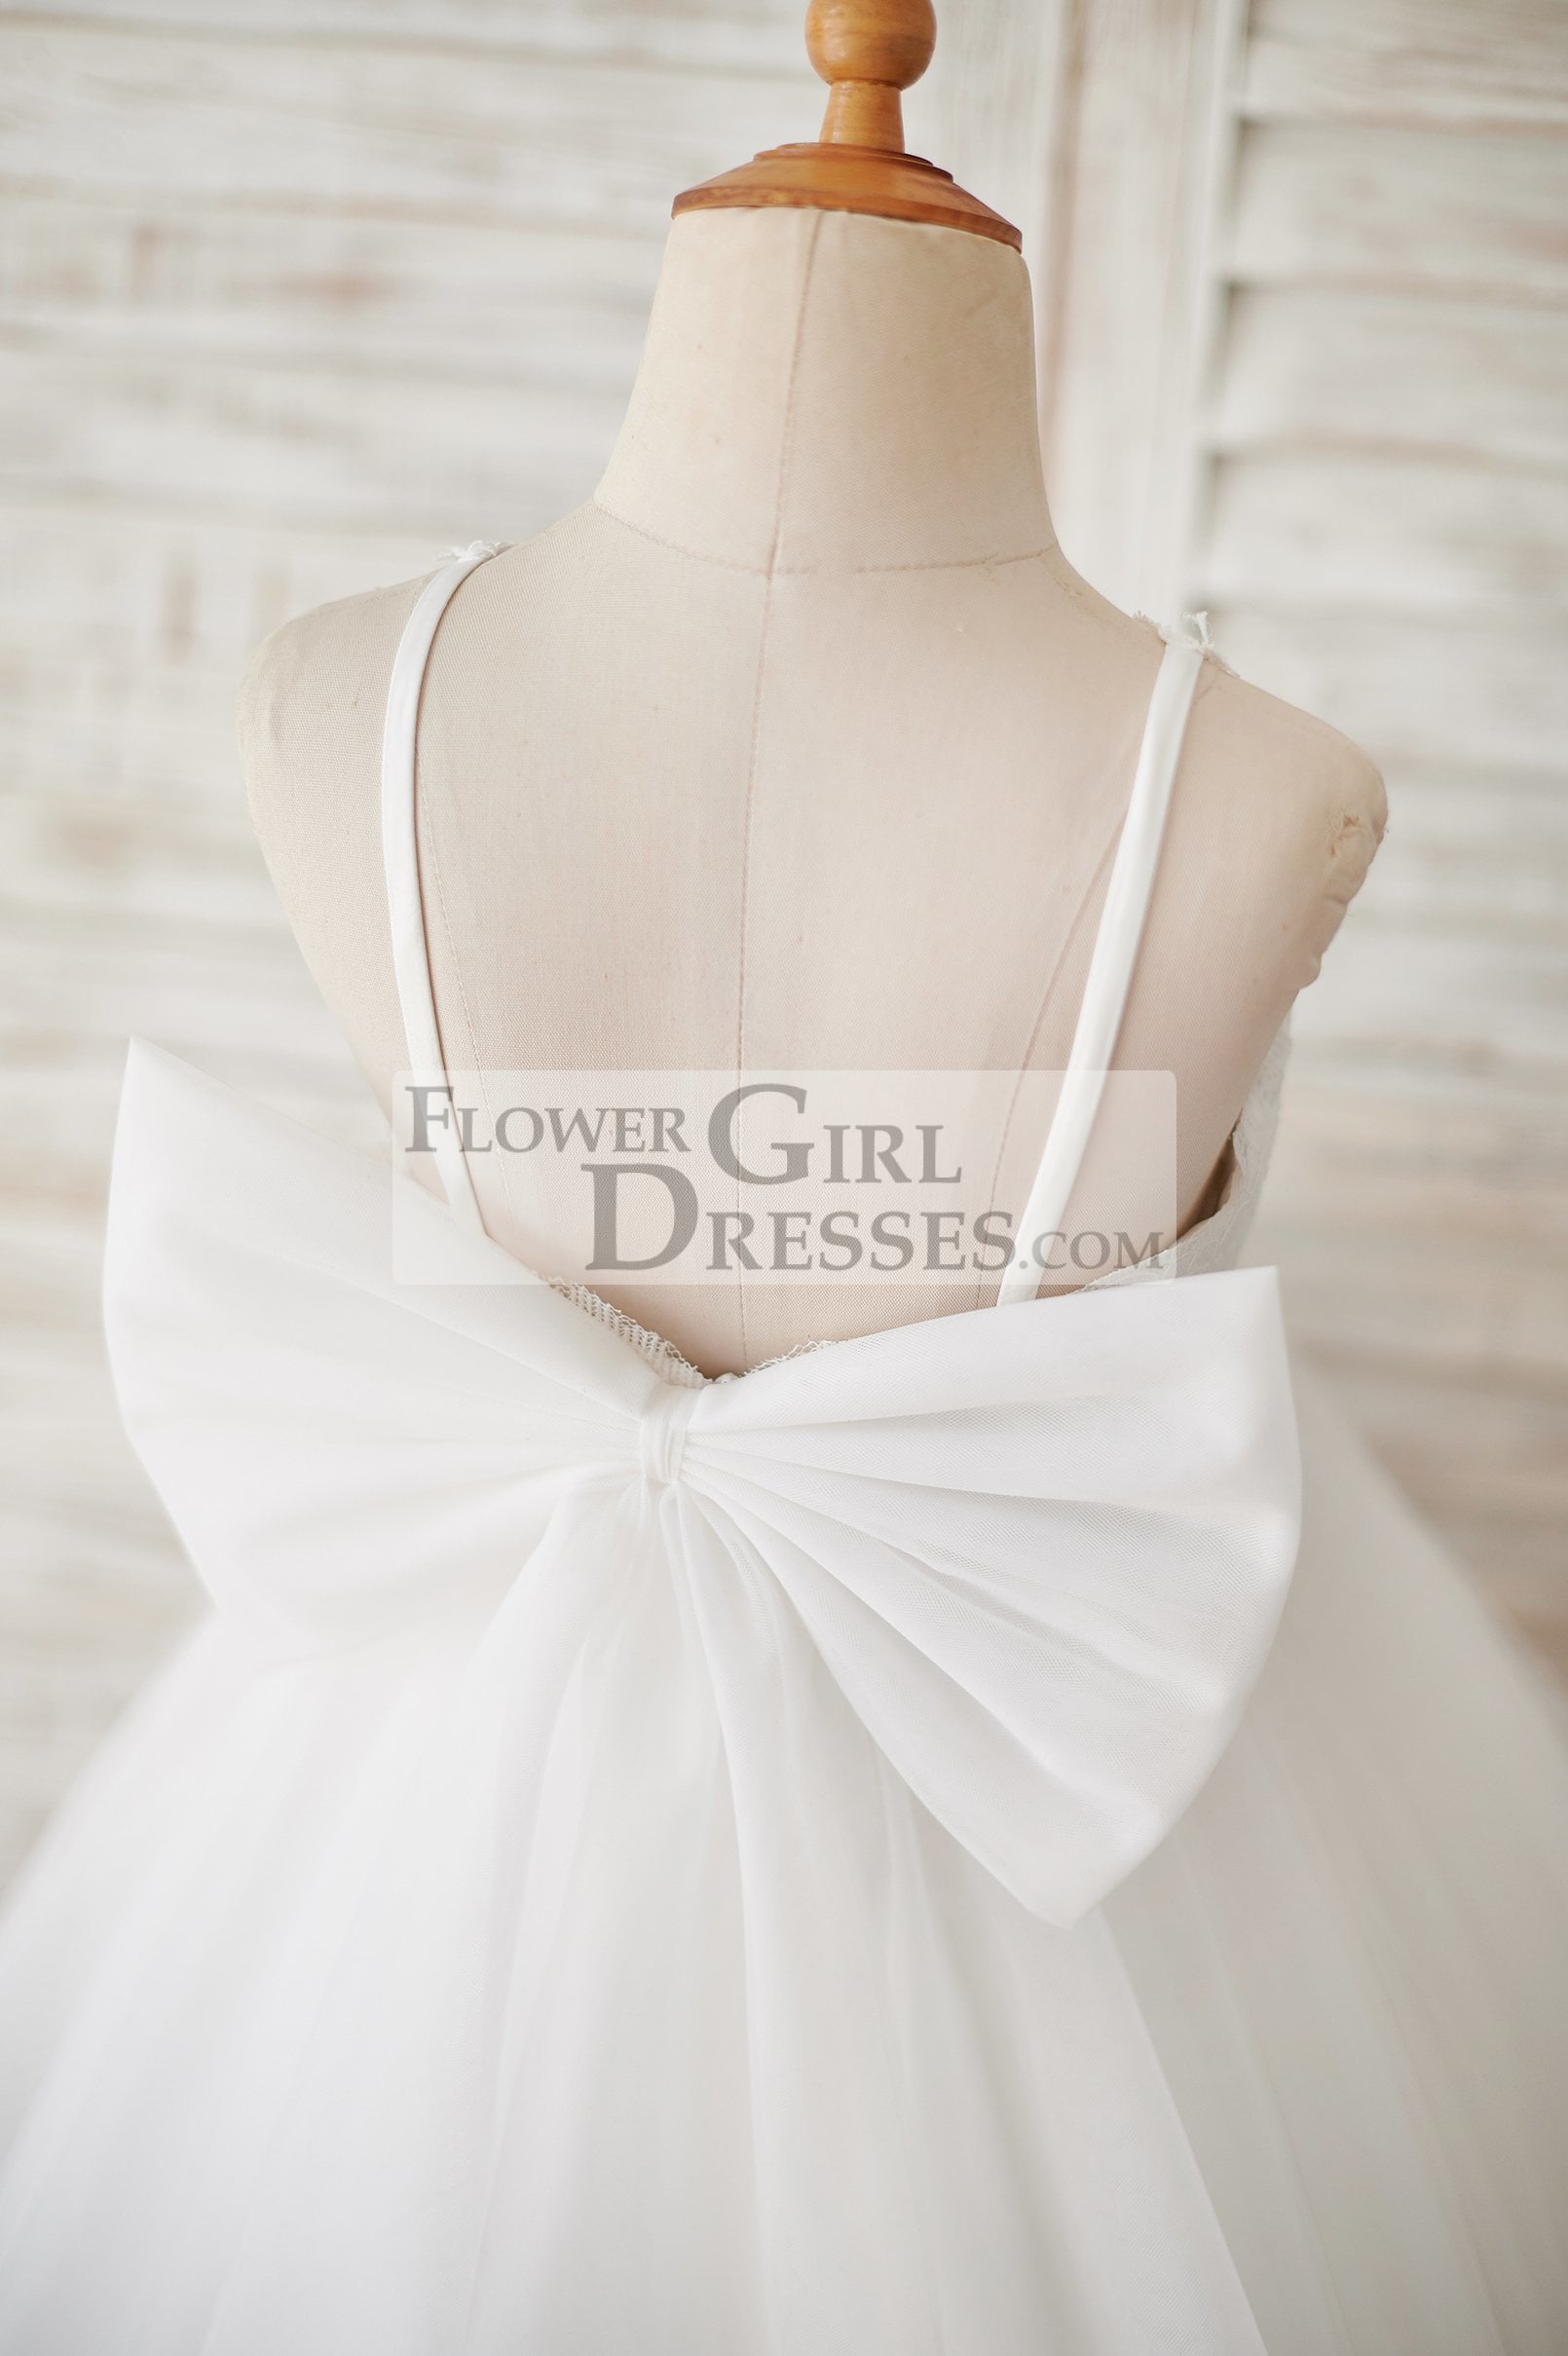 Ivory Lace Tulle Spaghetti straps Halter Neck Wedding Flower Girl Dress with Bow